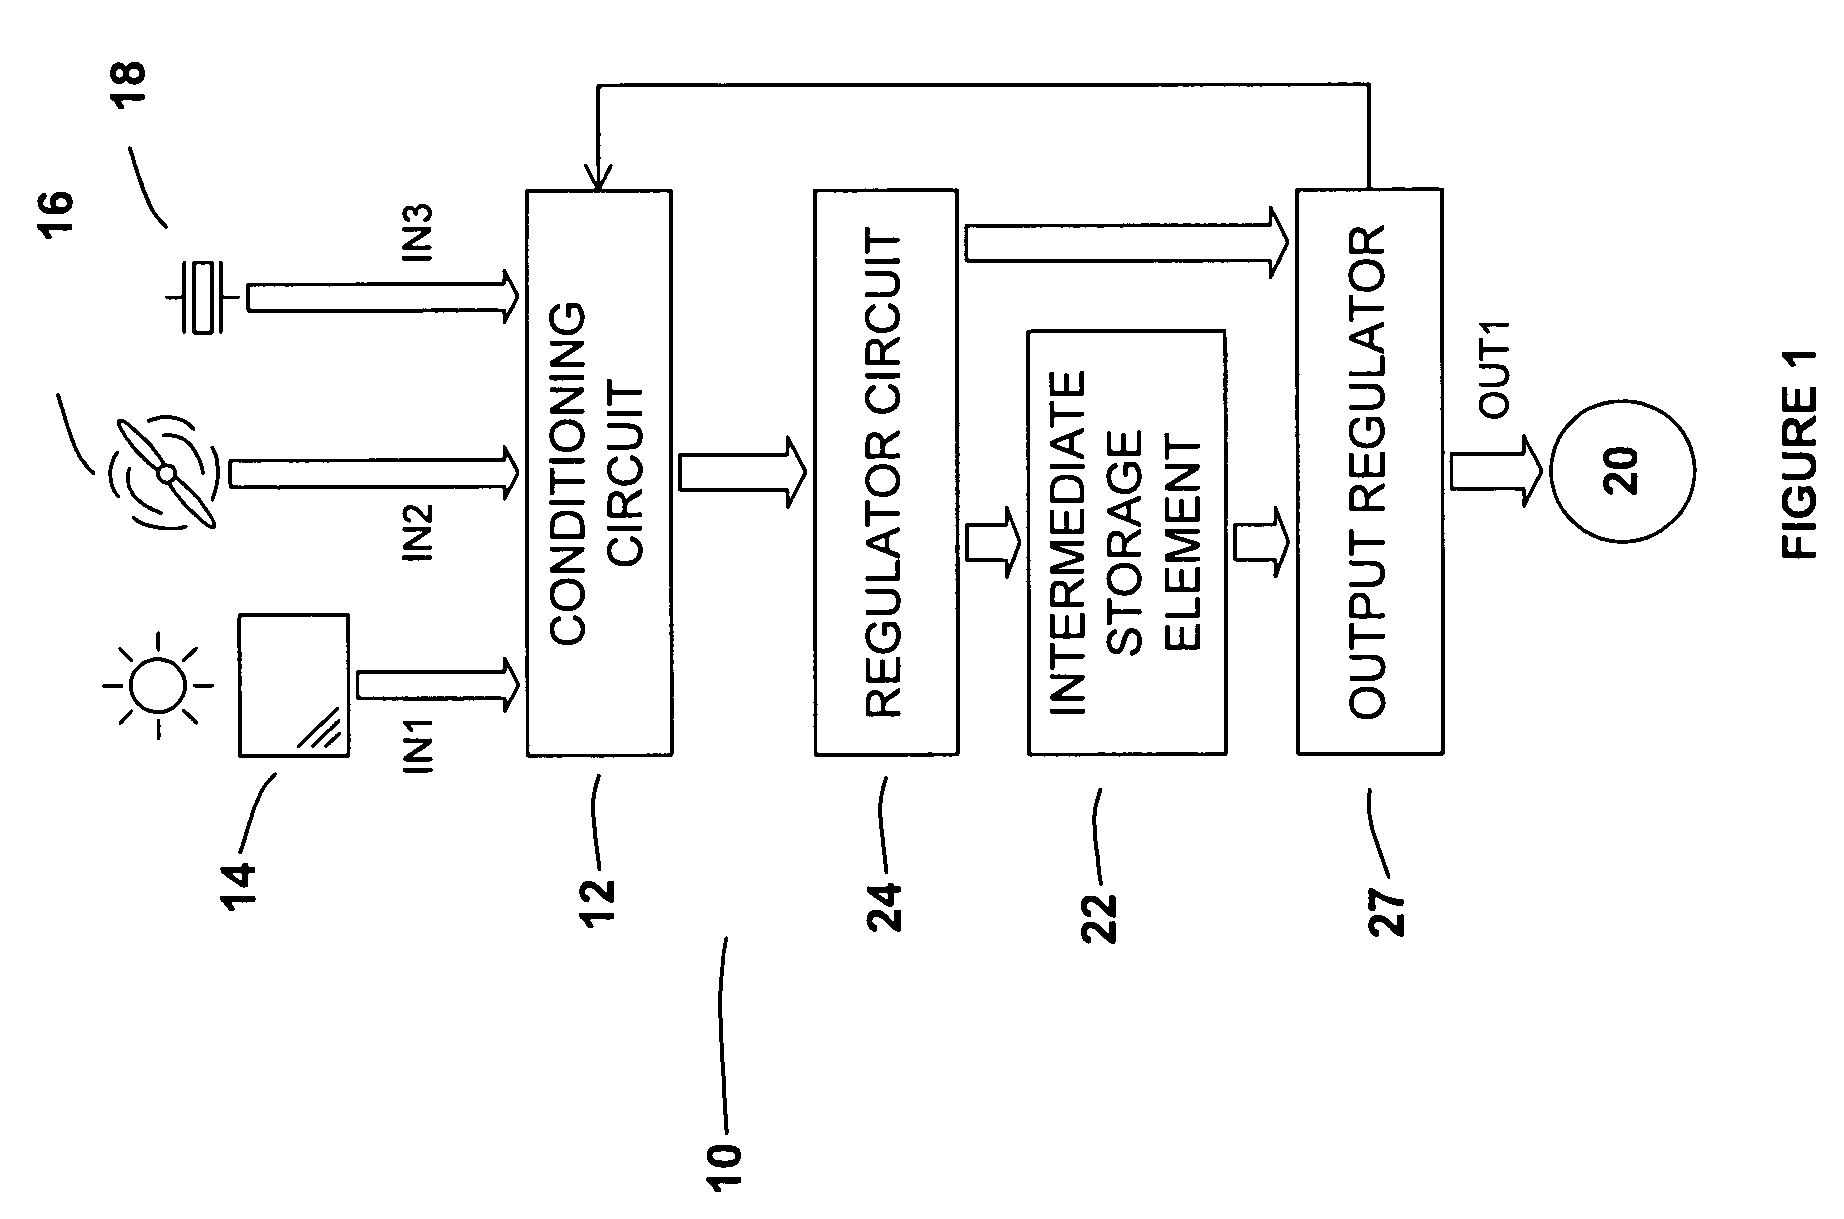 Multile input channel power control circuit